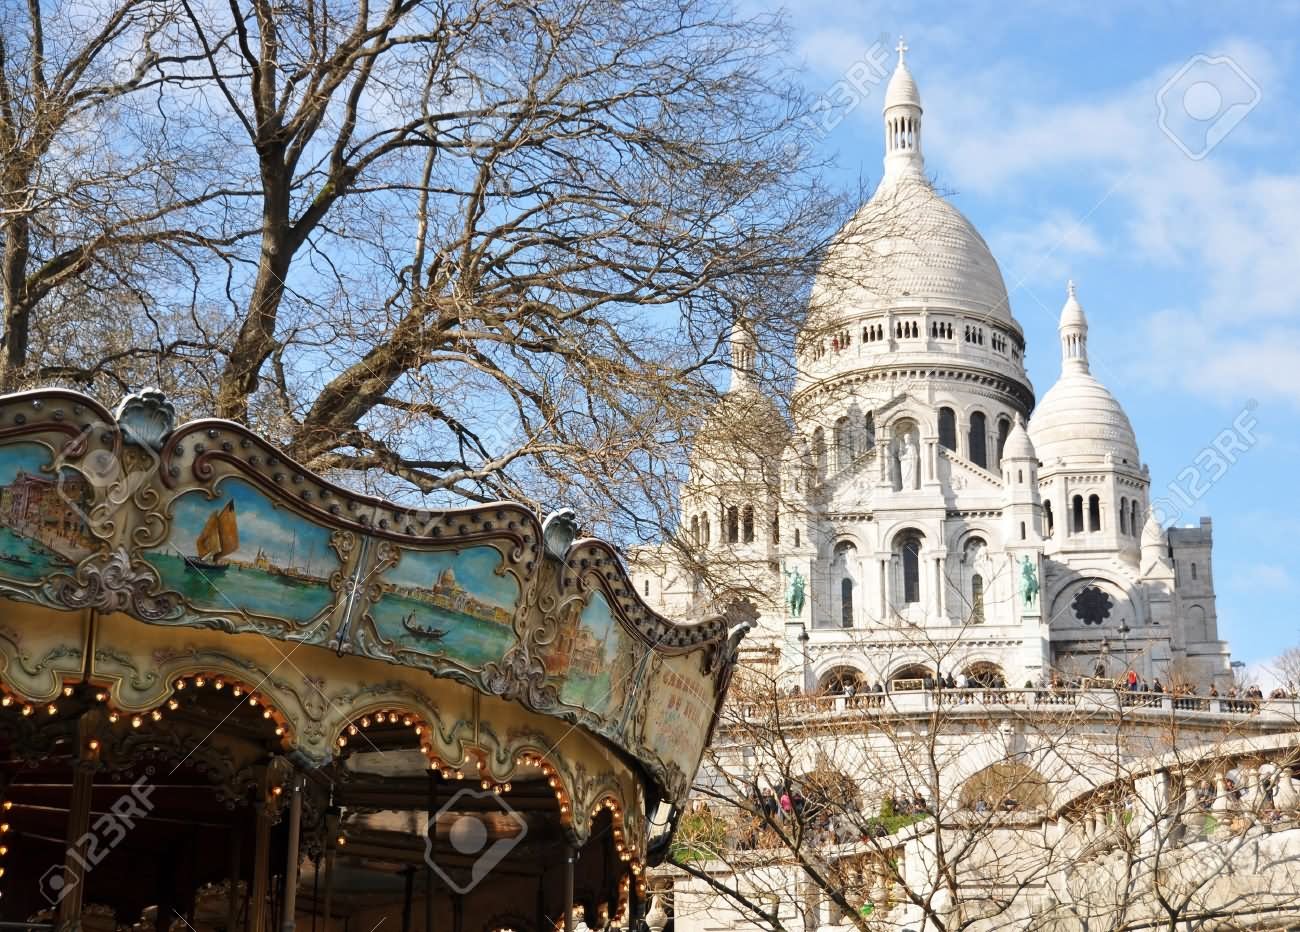 Old Carousel And Basilique Sacre-Coeur In Paris